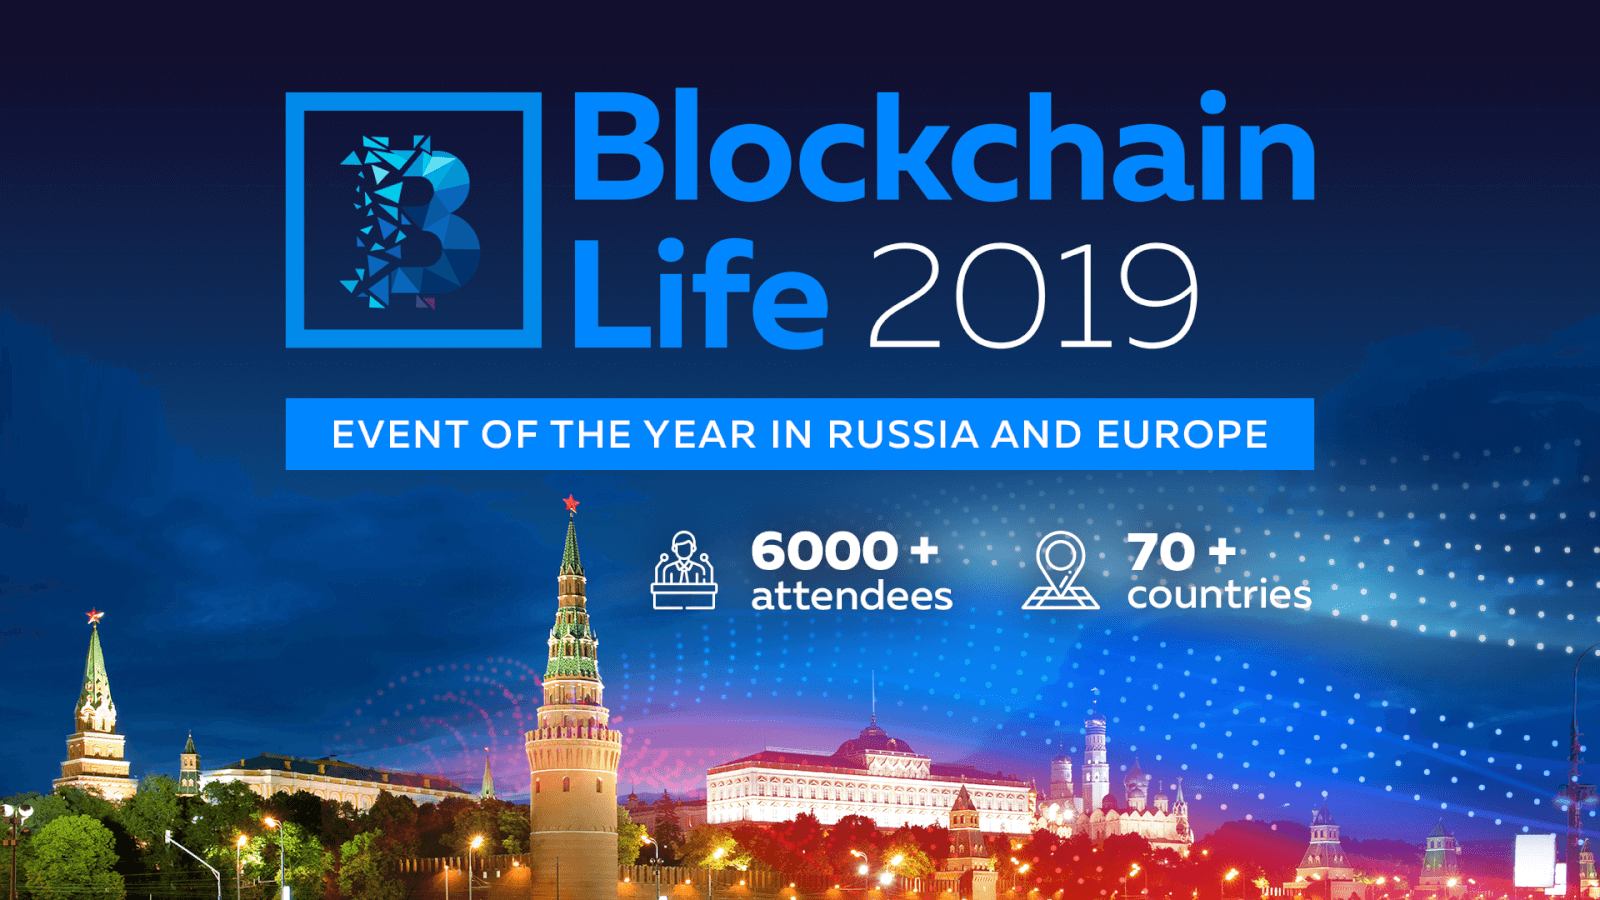 Blockchain Life 2019 October 16th—17th , Moscow, Expocentre